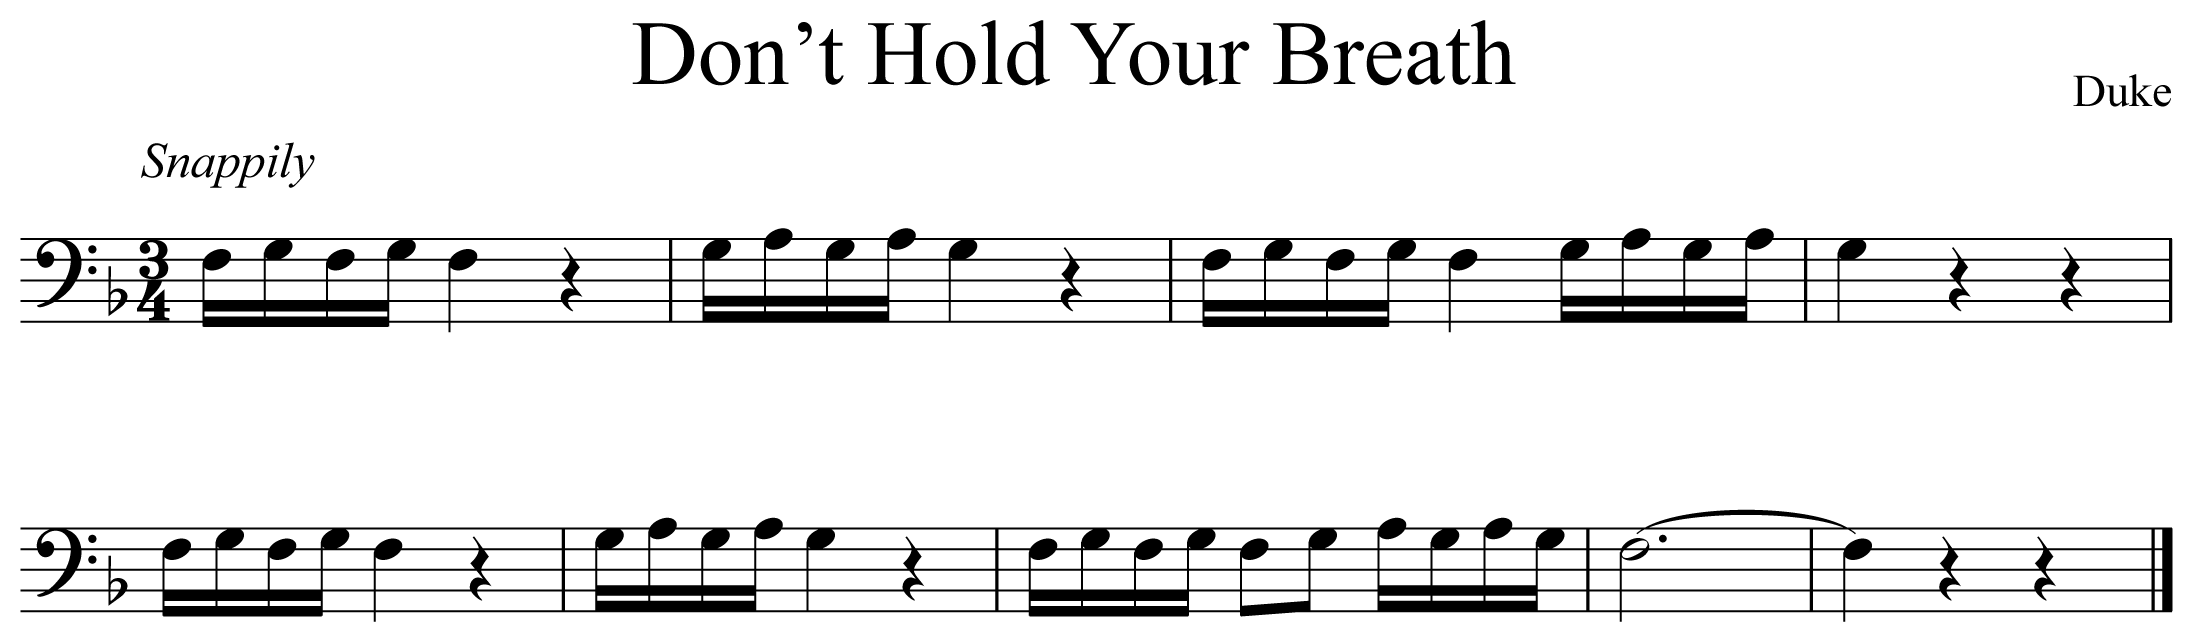 Don't Hold Your Breath Music Notation Euphonium